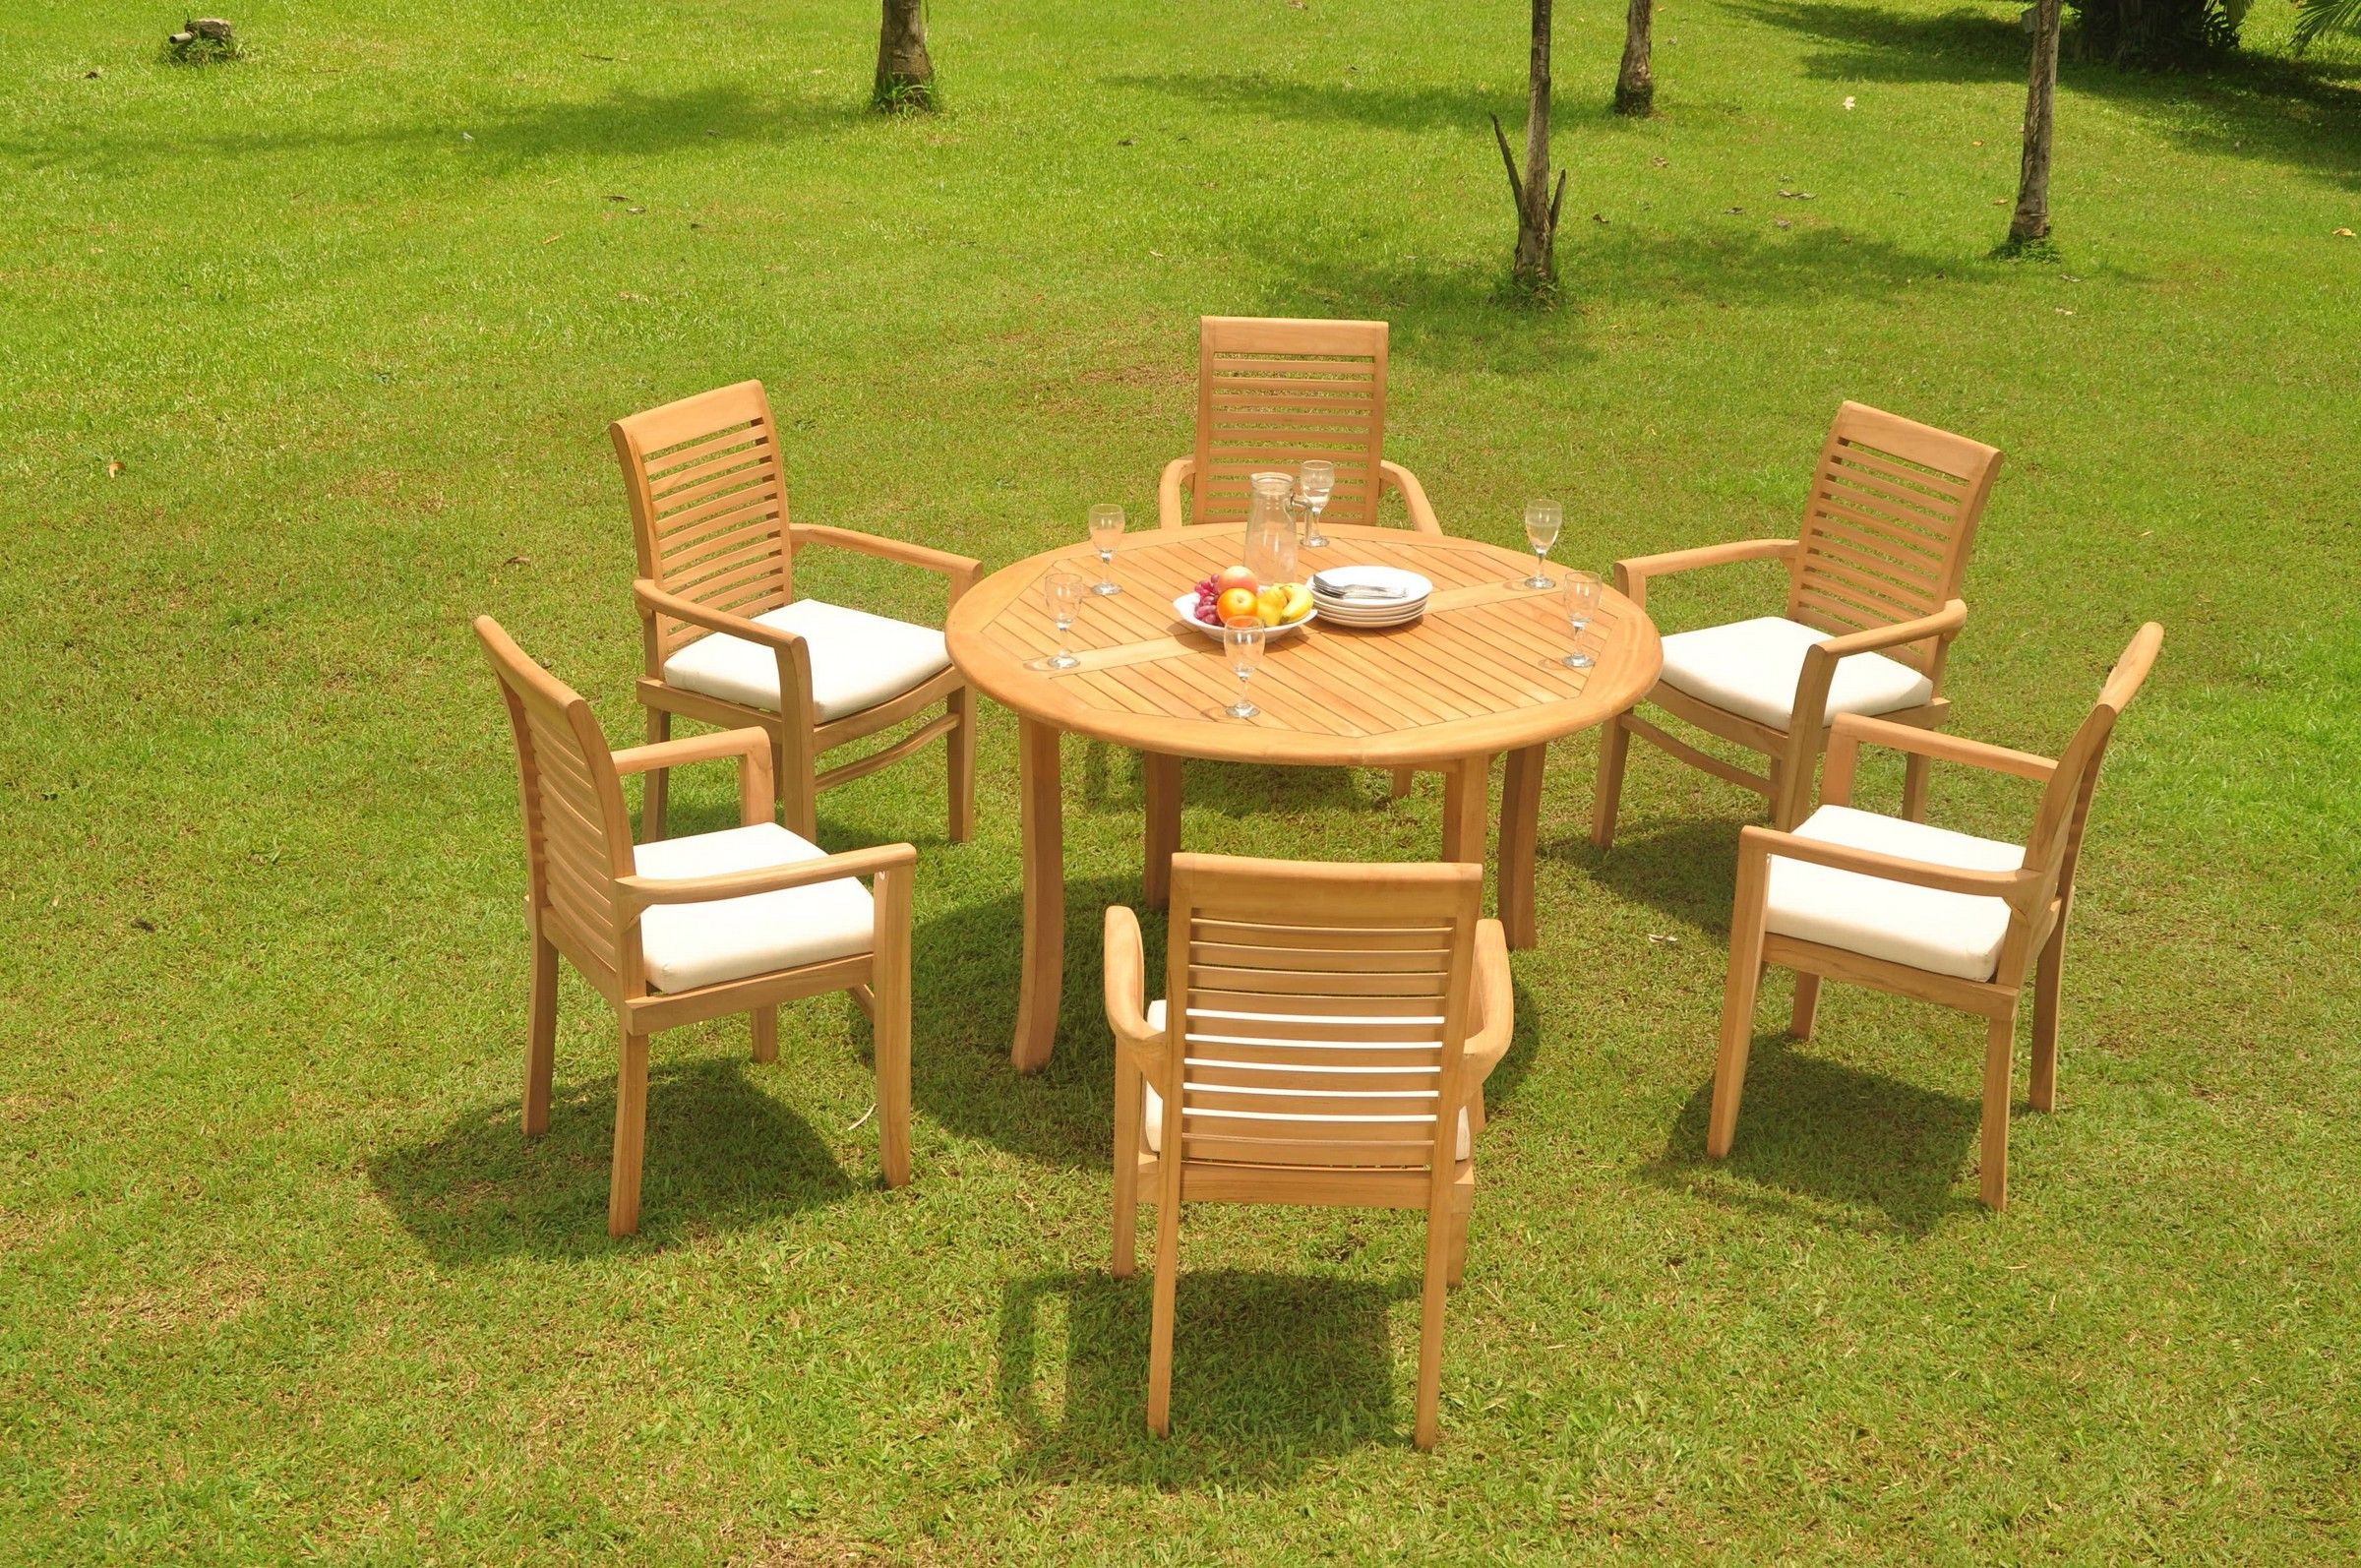 Teak Armchair Round Patio Dining Sets Inside Most Recently Released Grade A Teak Dining Set: 6 Seater 7 Pc: 52" Round Table And 6 Mas (View 2 of 15)